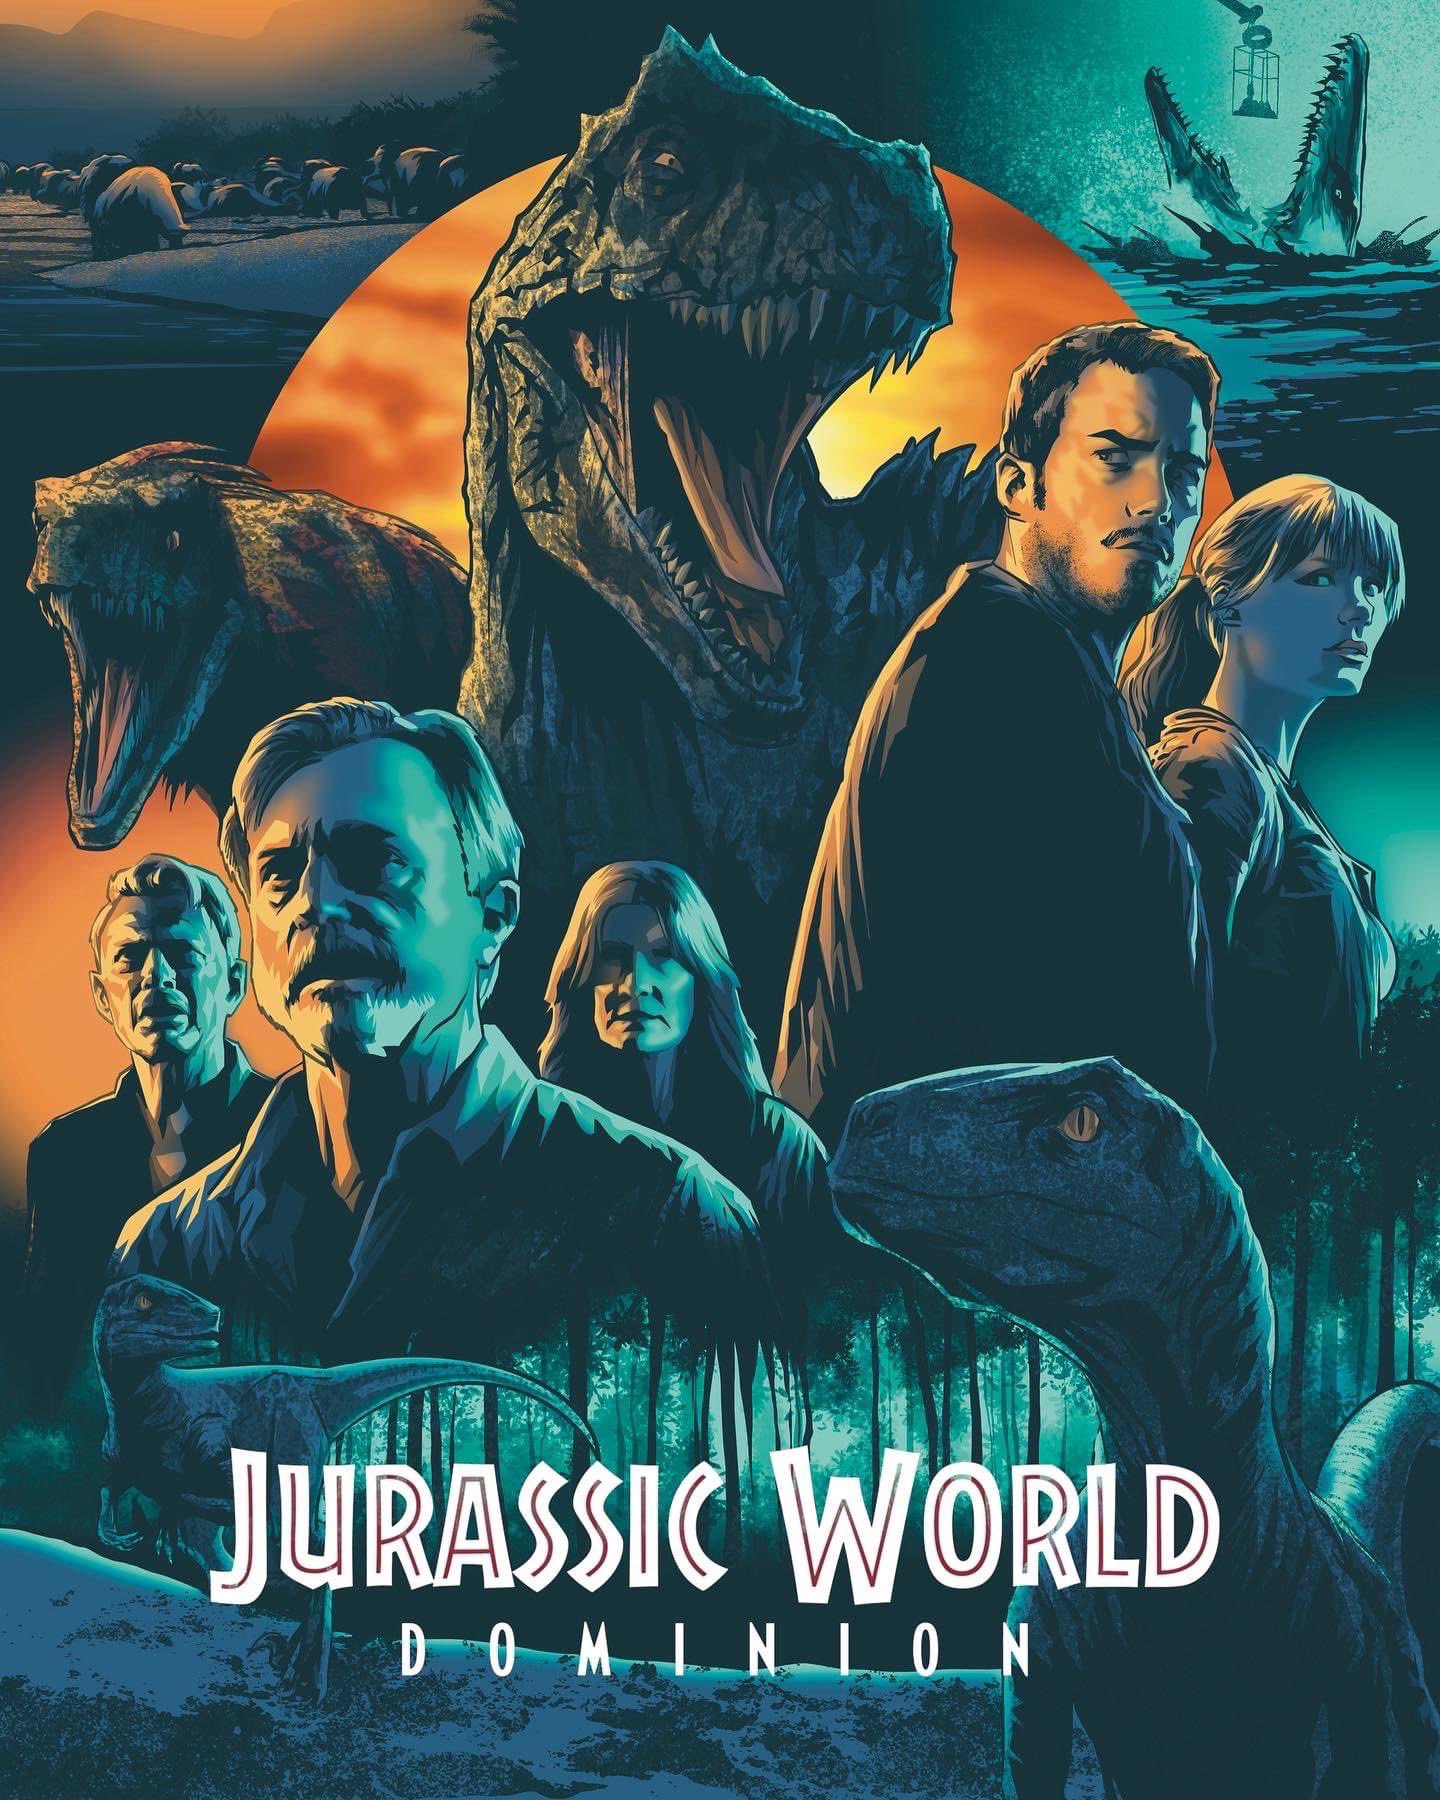 Jurassic World Dominion Box Office Collection Day 1: Film opens well across  India - Pragativadi